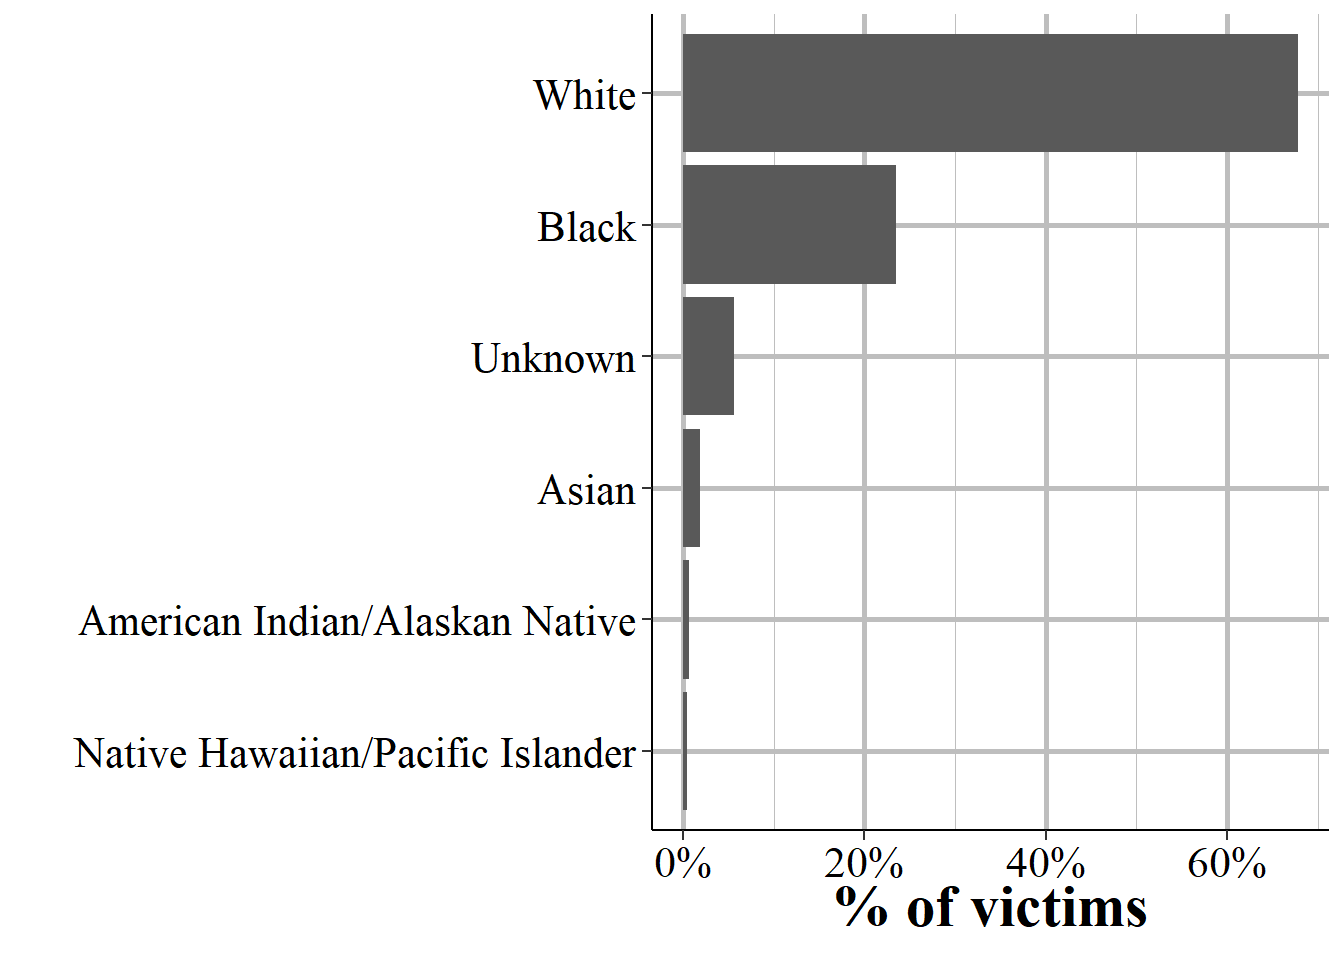 The race of all victims reported in the 2019 NIBRS data.